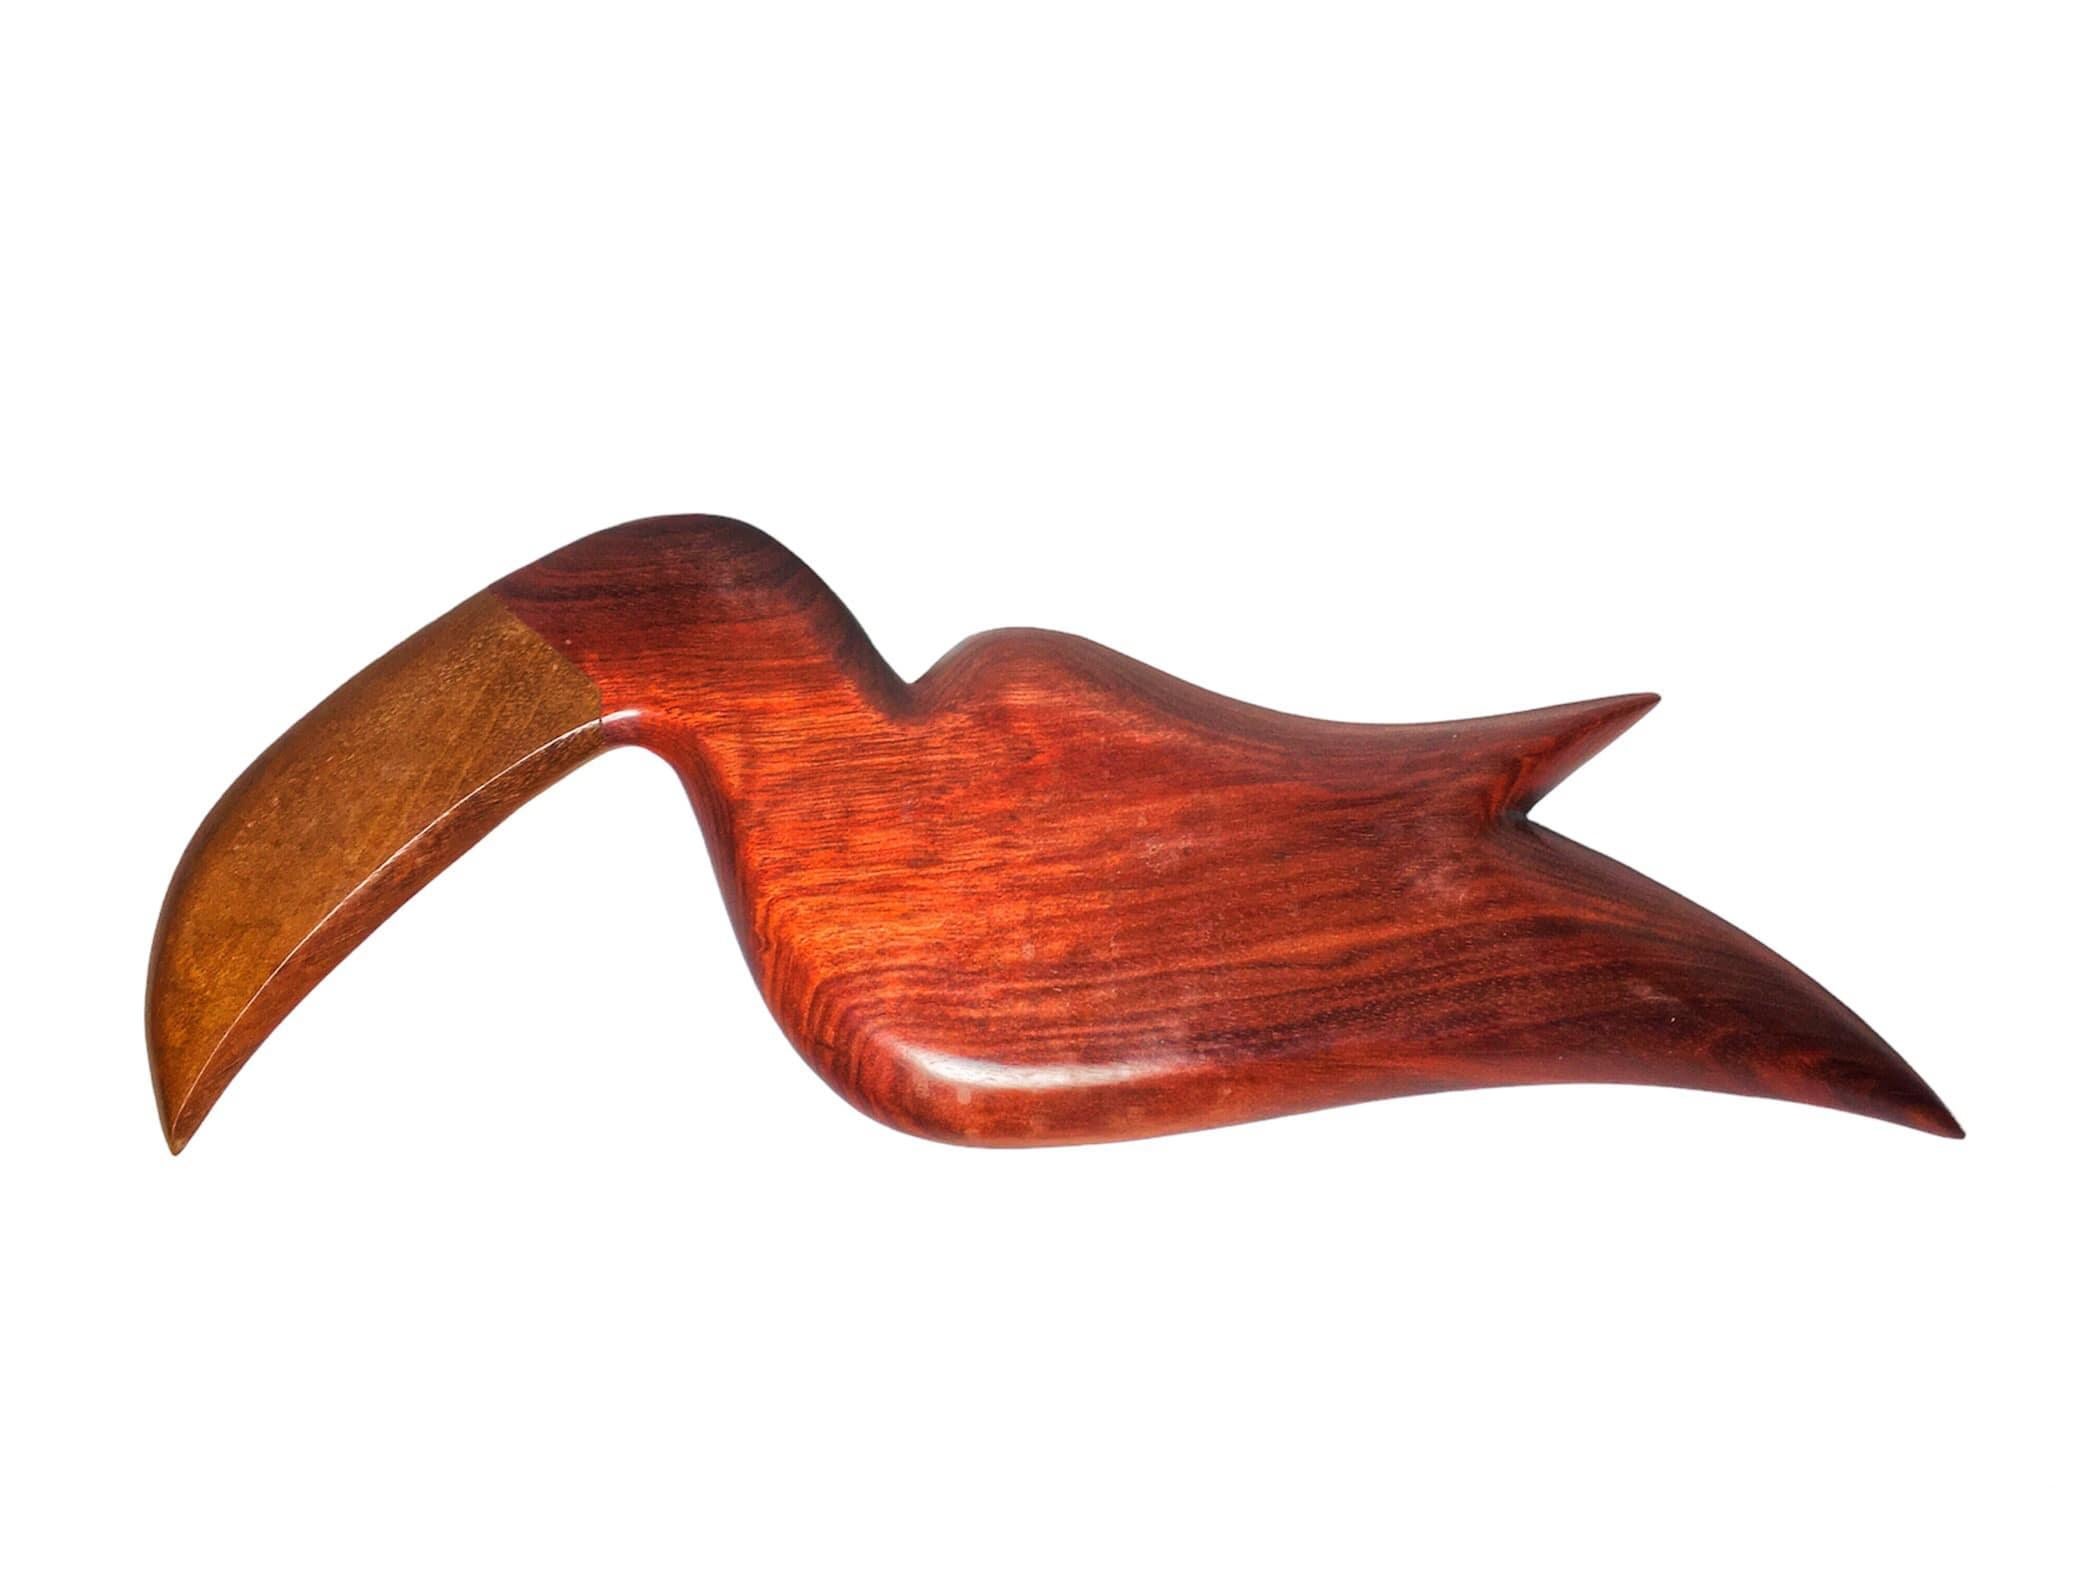 Mid-20th Century Vintage Toucan Shaped Teak Wood Serving Tray, Snack Bowl For Sale